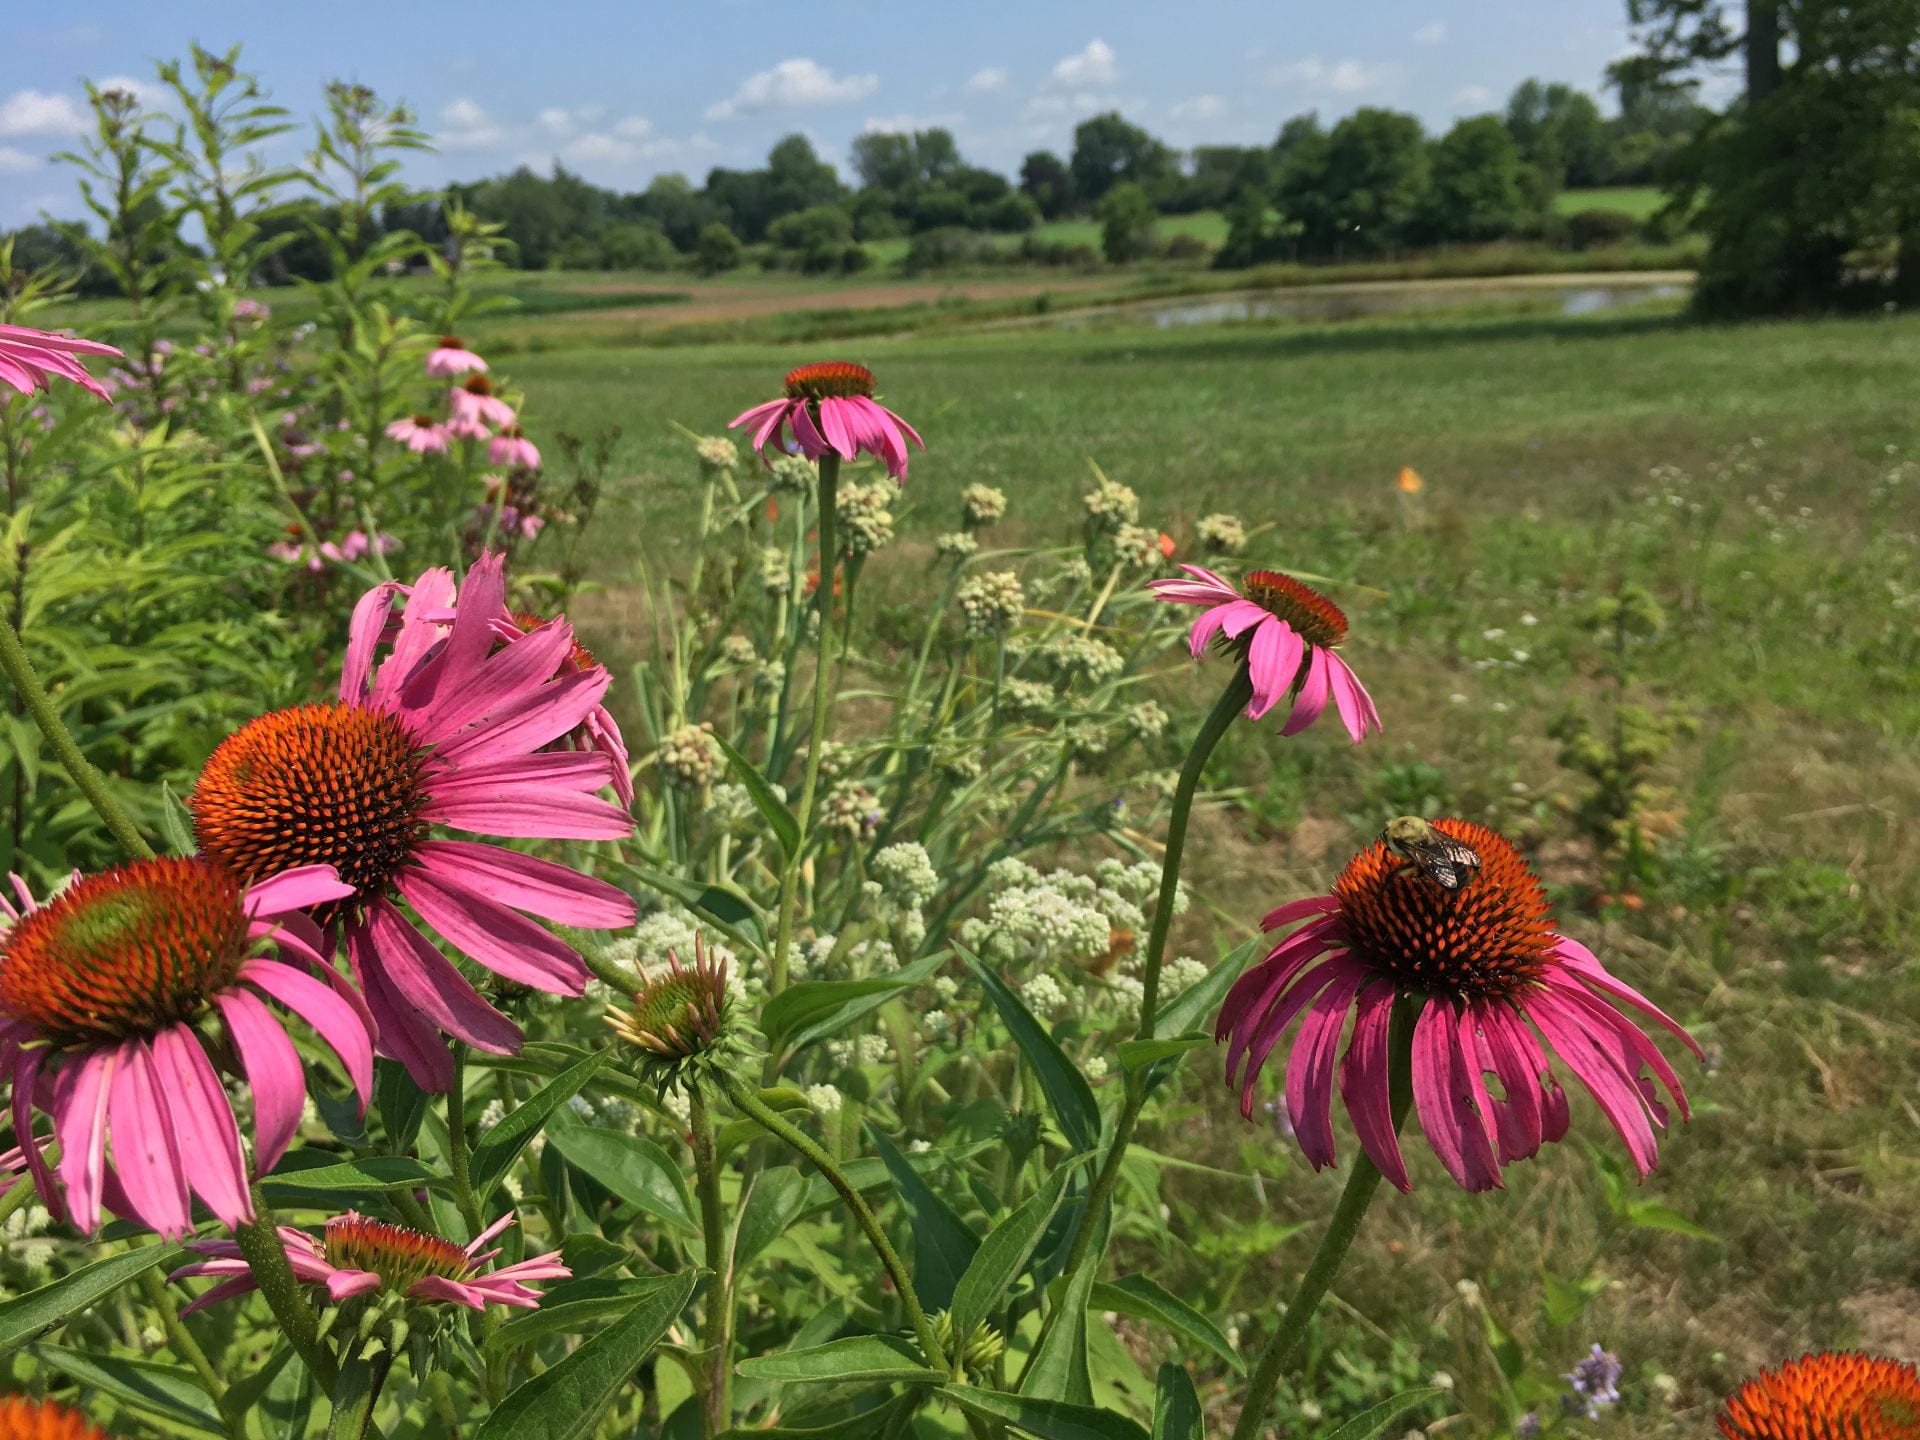 photo of echinacea flowers in a field